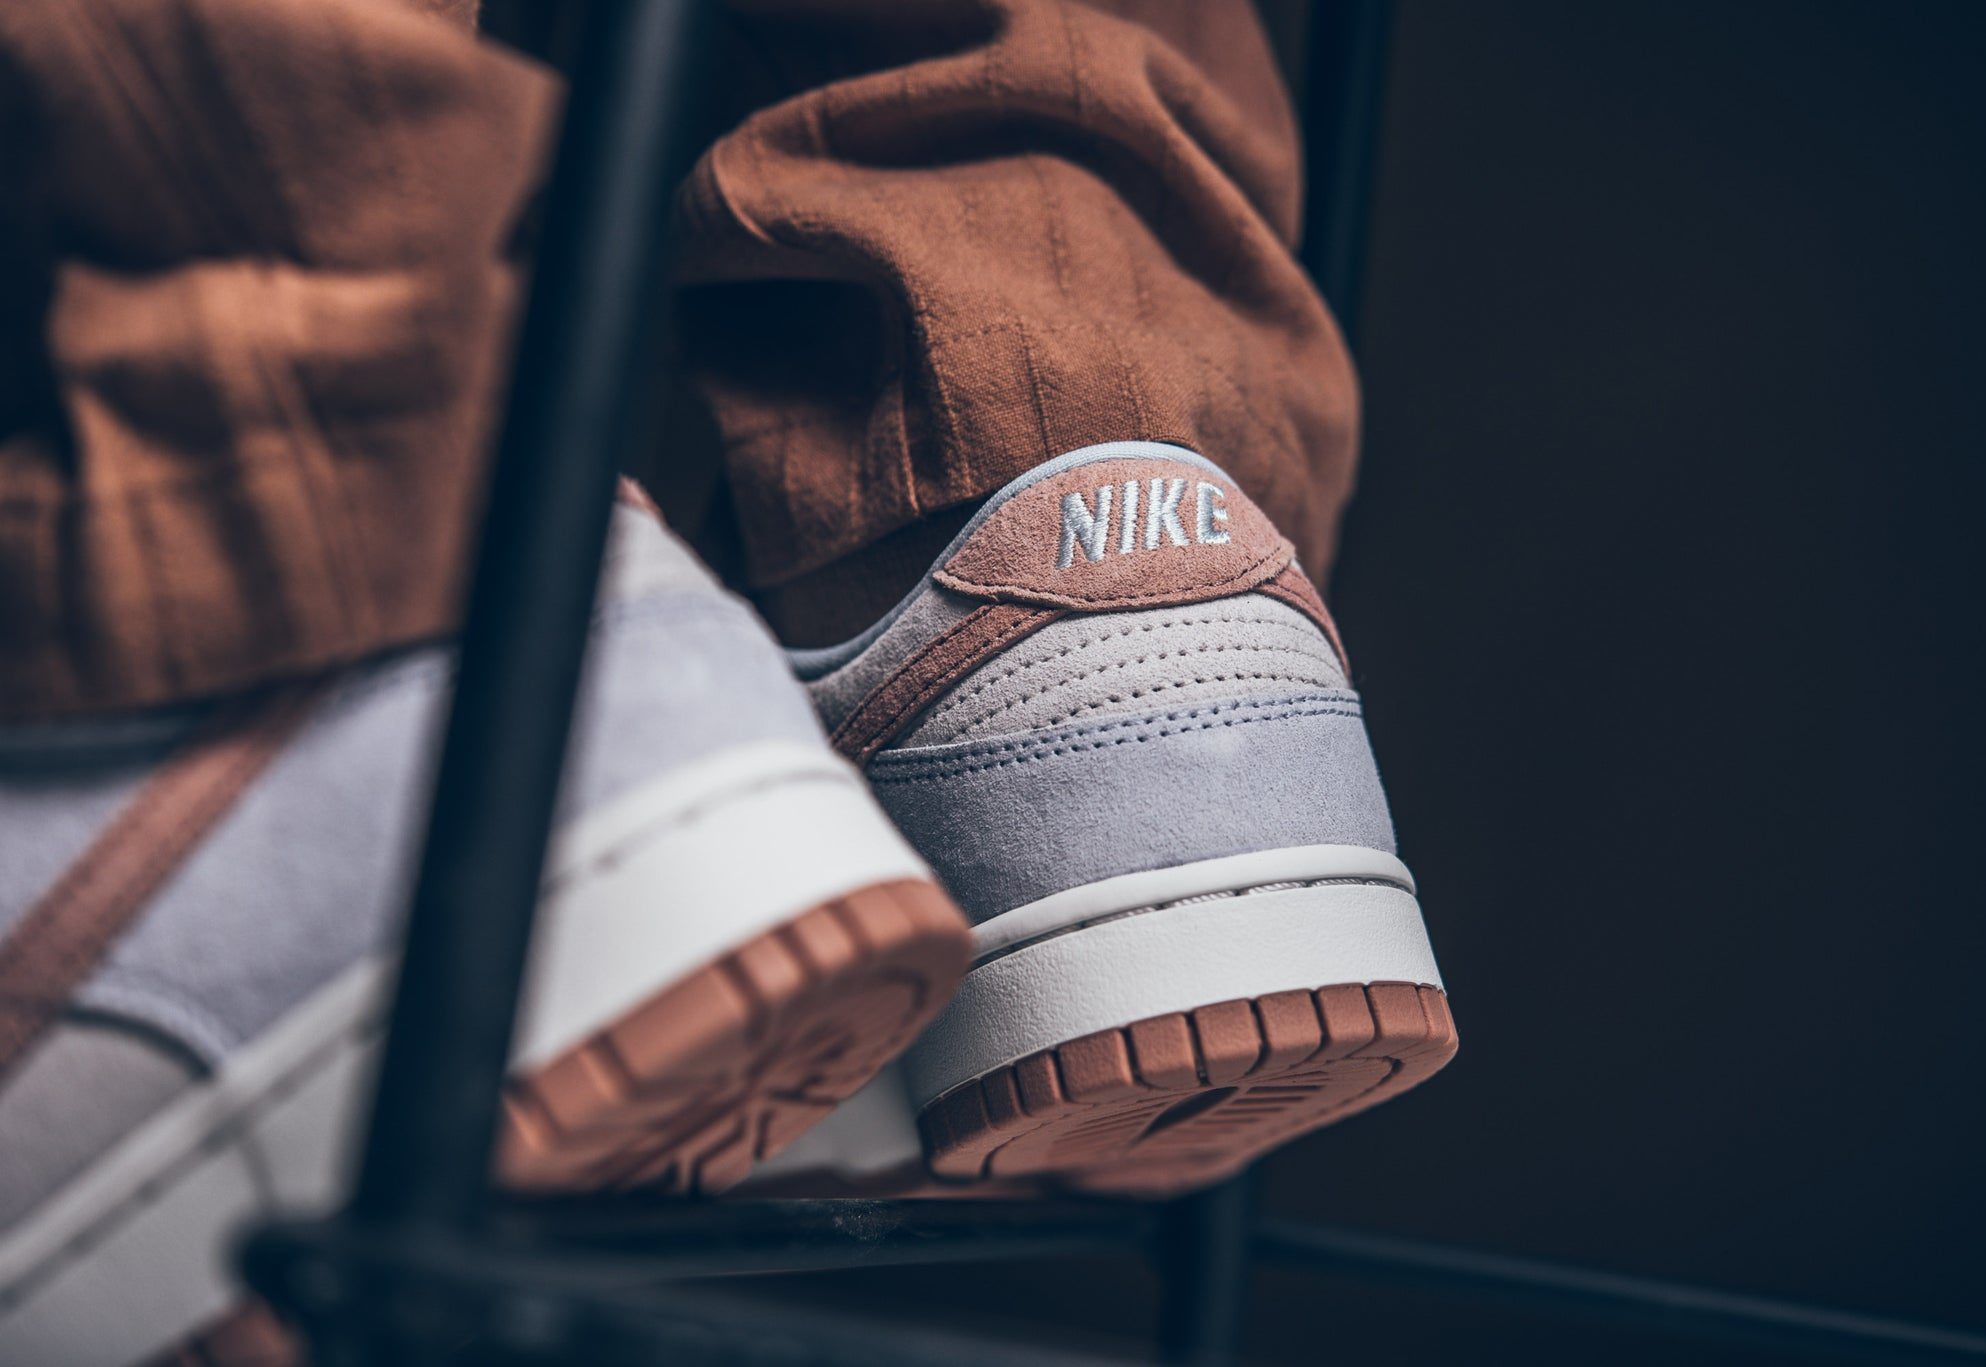 Кроссовки Nike Dunk Low Fossil Rose